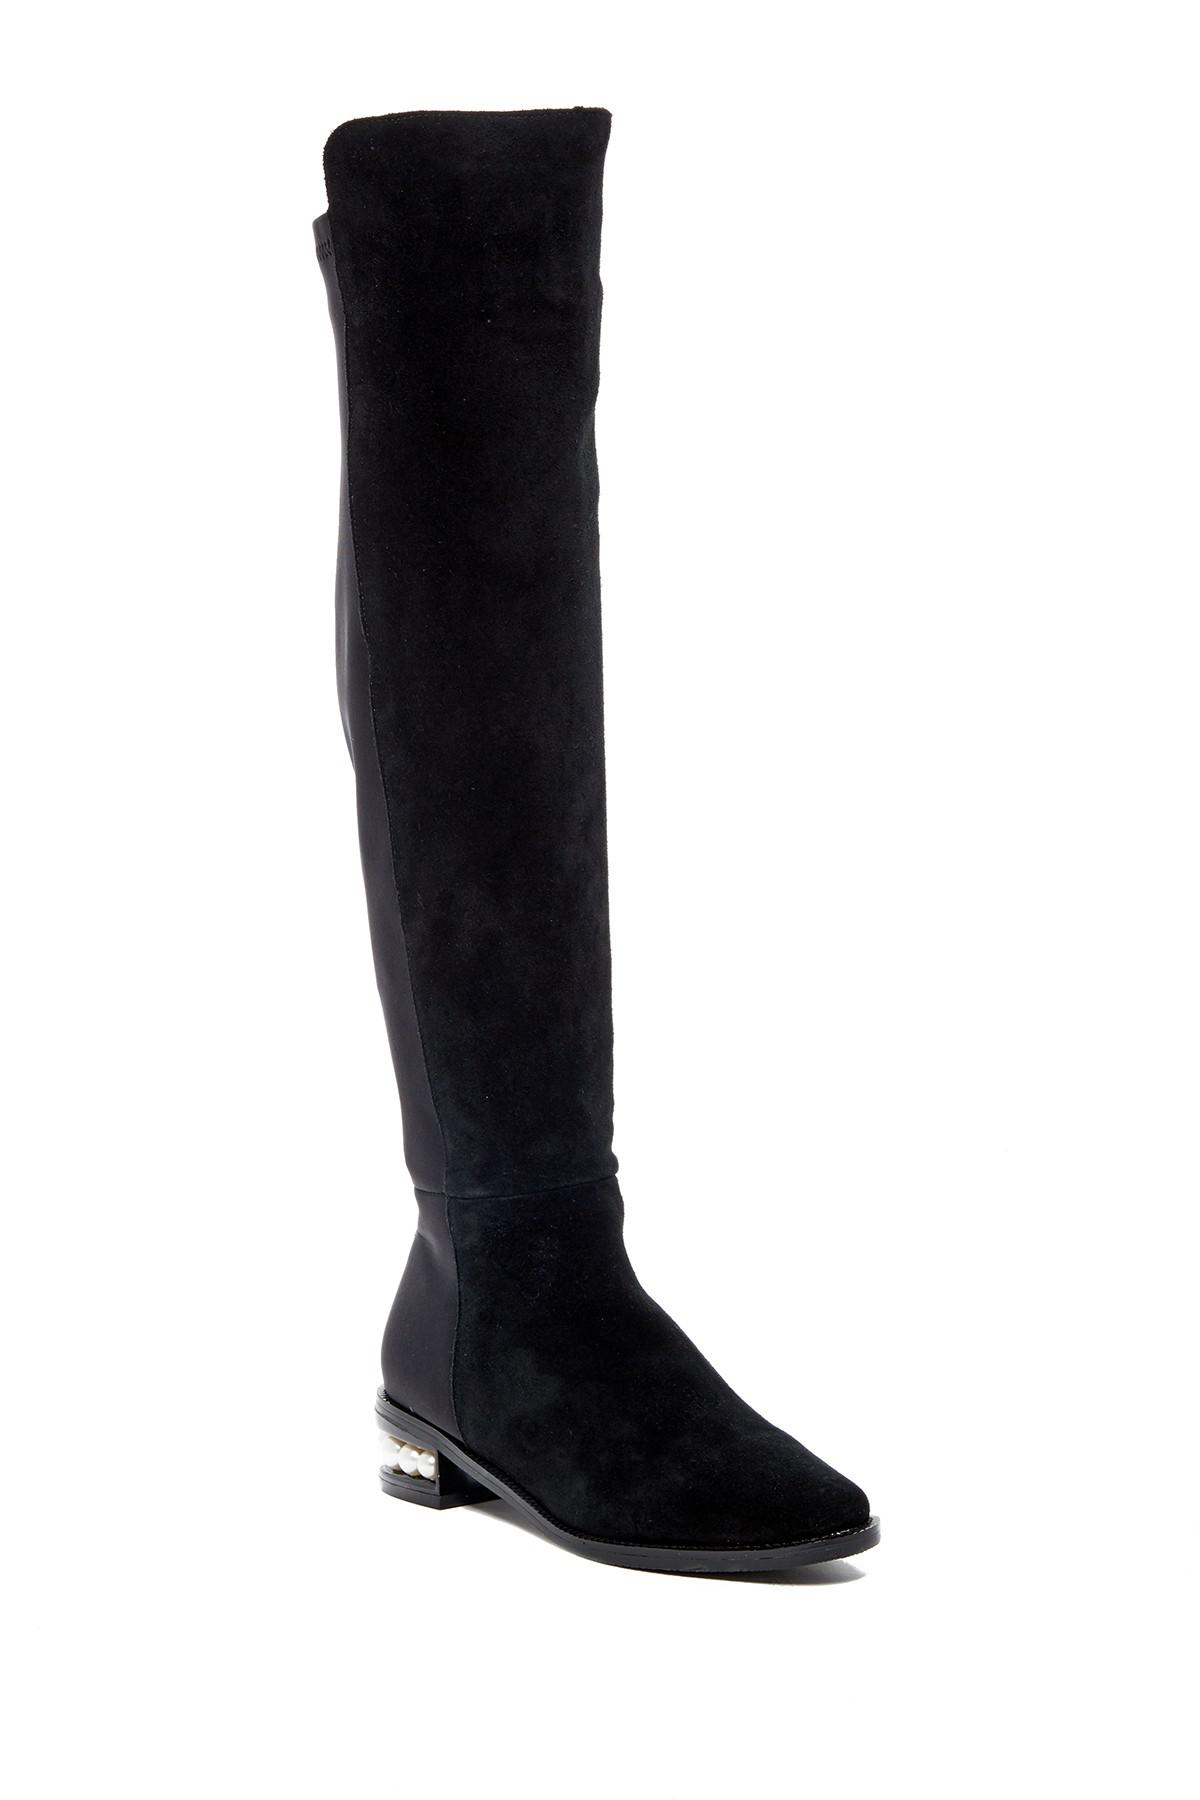 Catherine Malandrino Pasta Faux Pearl Over-the-knee Boot in Black | Lyst